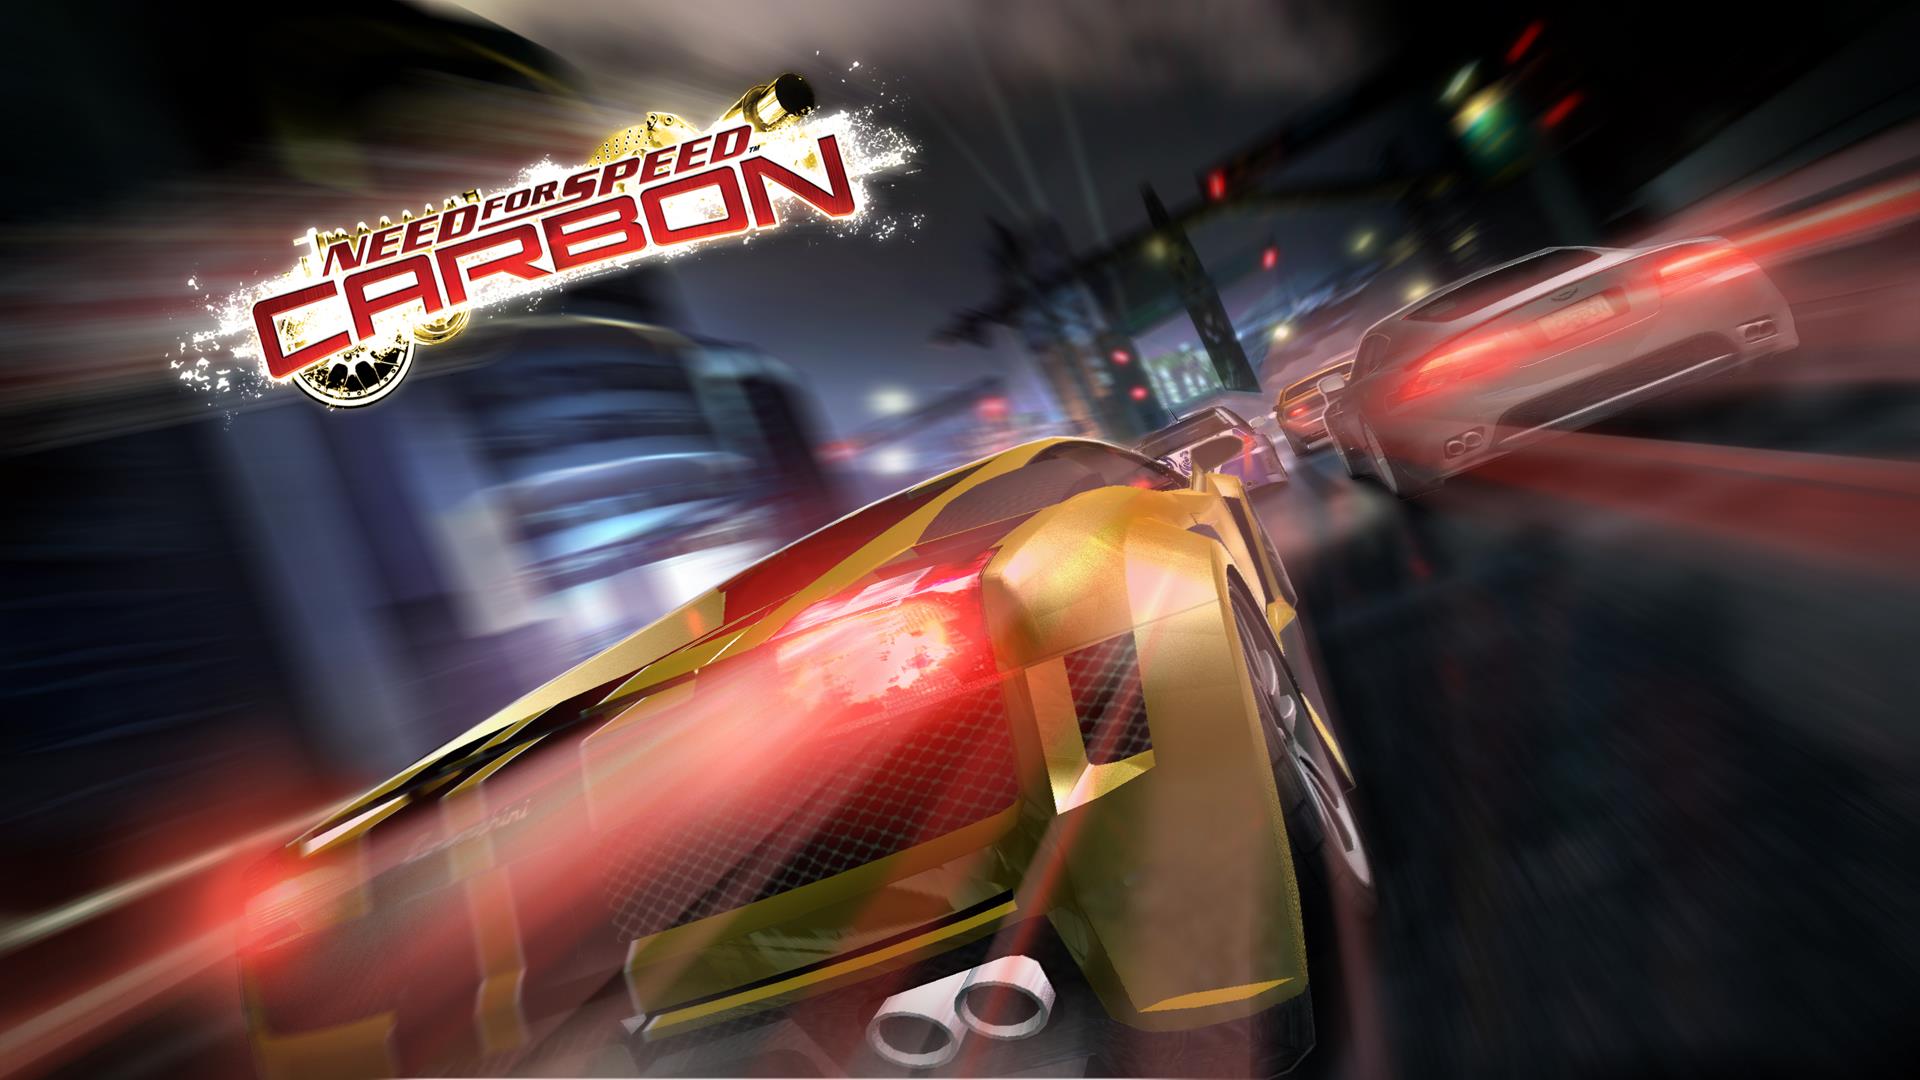 video game, need for speed: carbon, need for speed